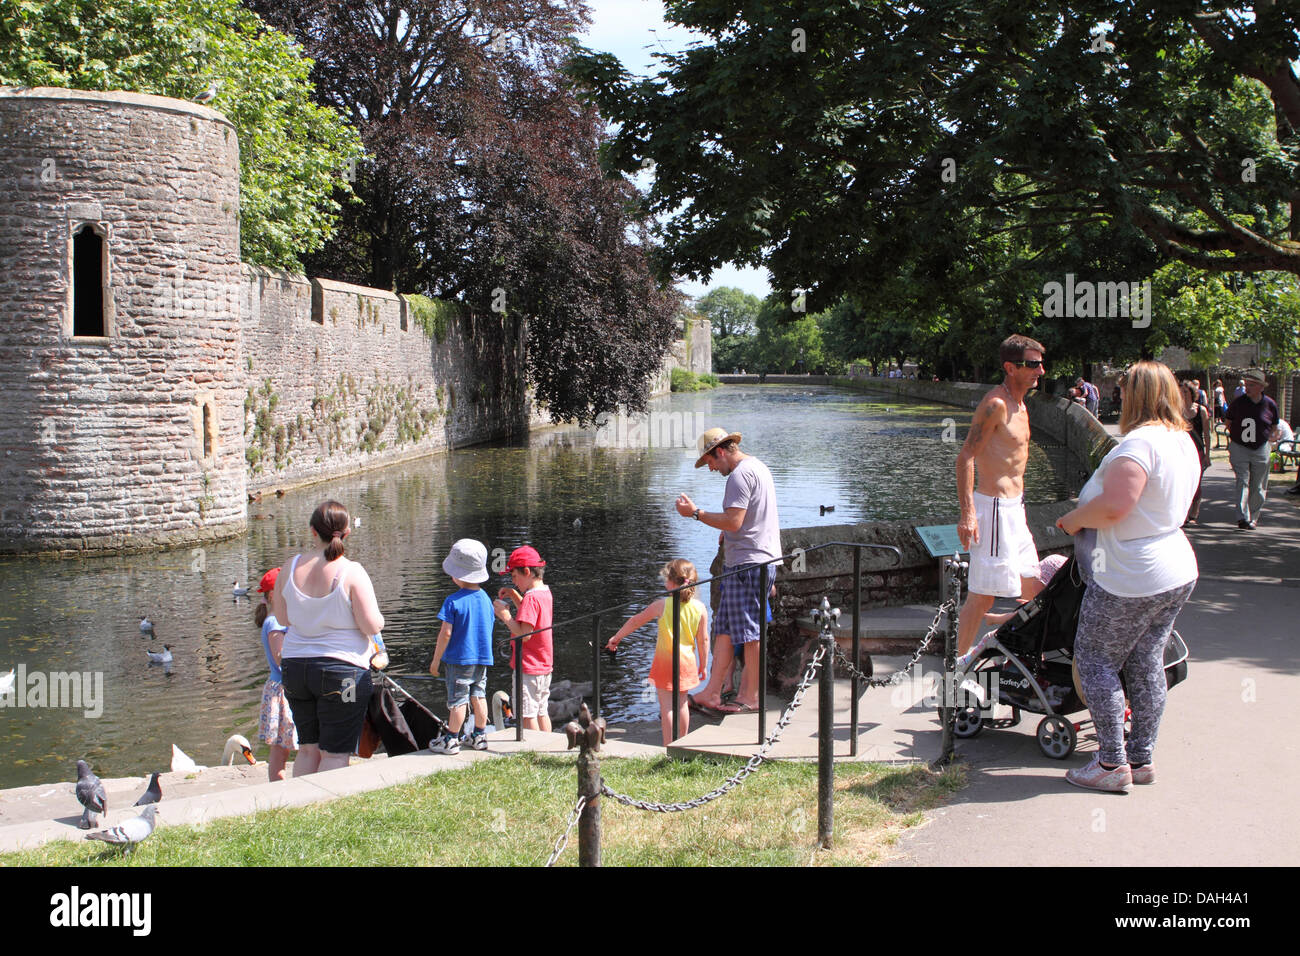 Wells, Somerset, England - hot summer day at The Bishops Palace - family feeding the swans at the moat Stock Photo